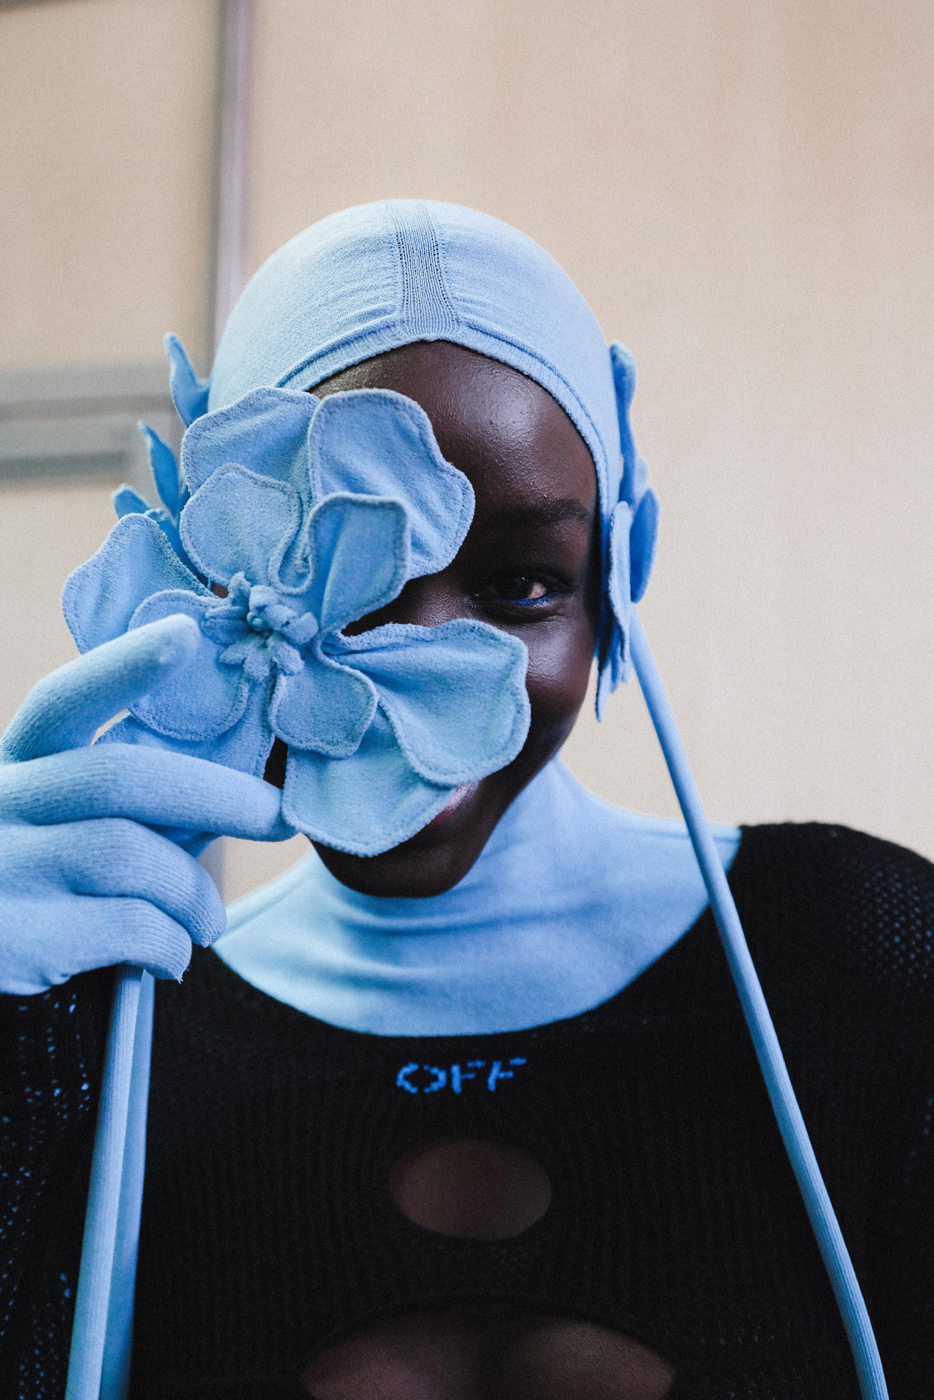 Ibrahim Kamara presents his first campaign for Off-White